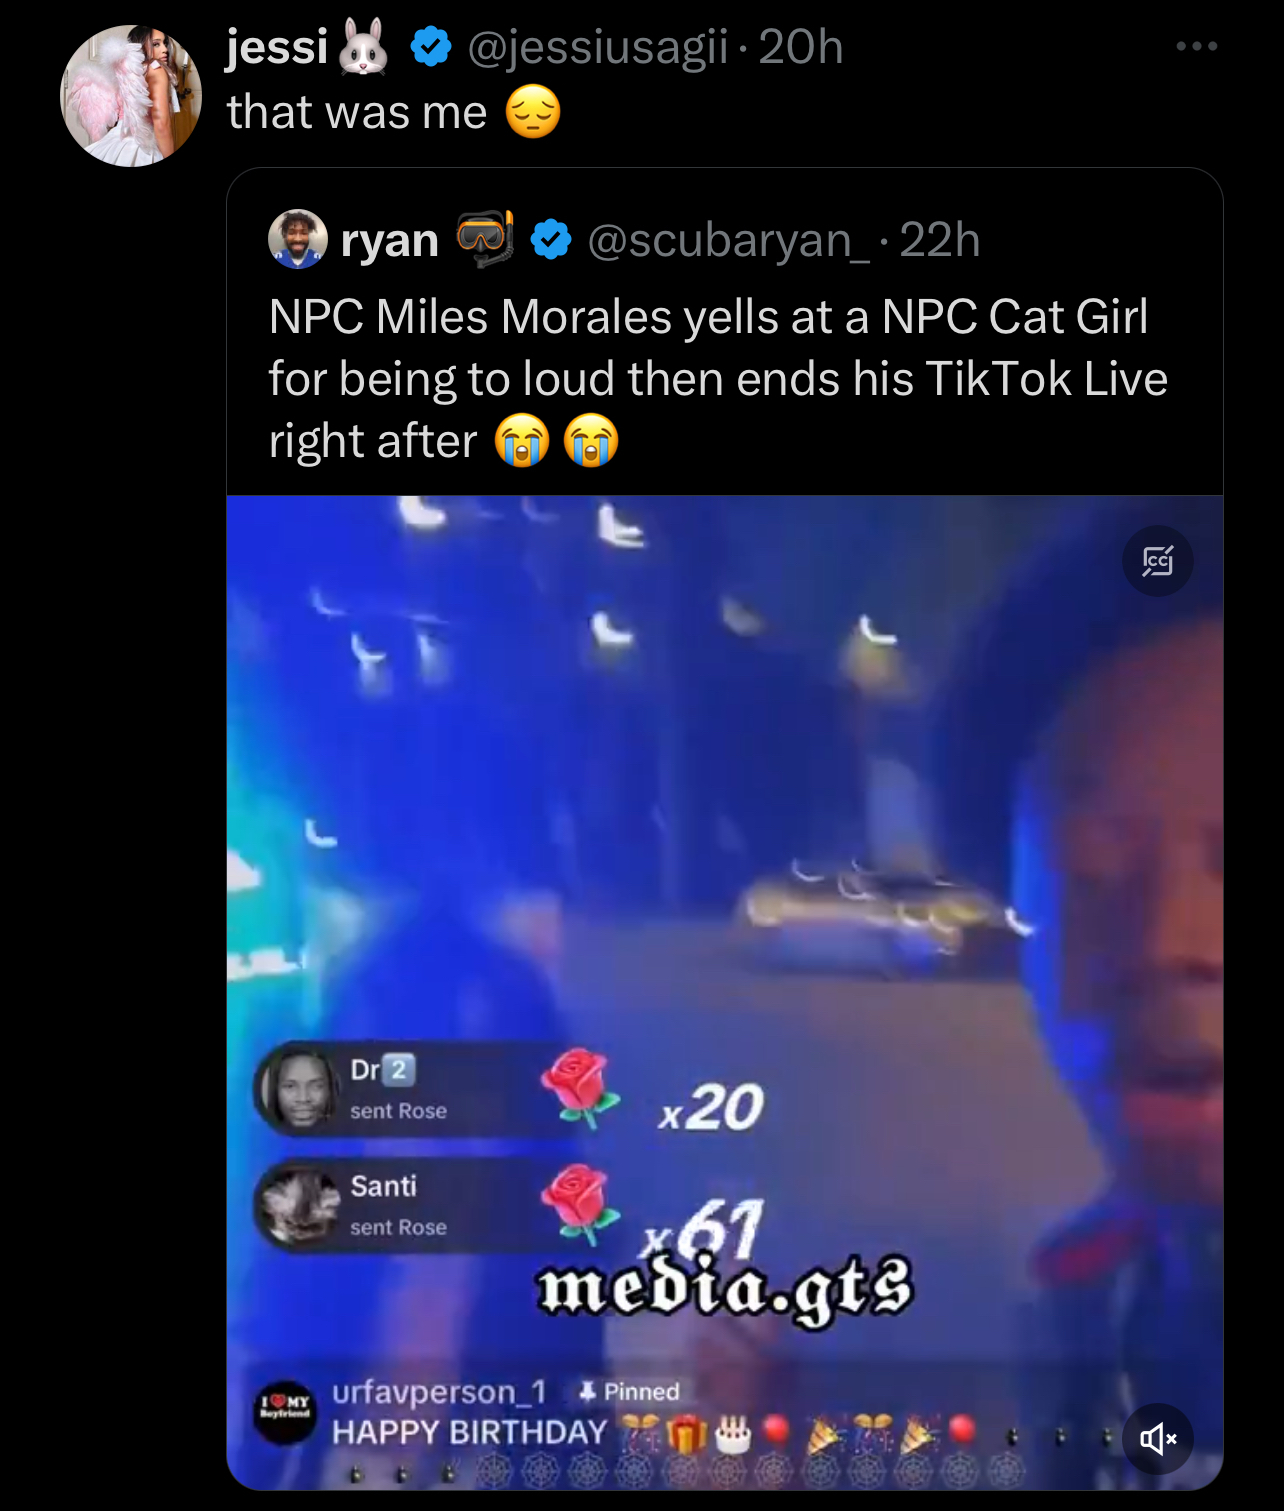 Screengrab of a tweet showing a TikTok Live with NPC Miles Morales and Cat Girl, and viewers&#x27; reactions